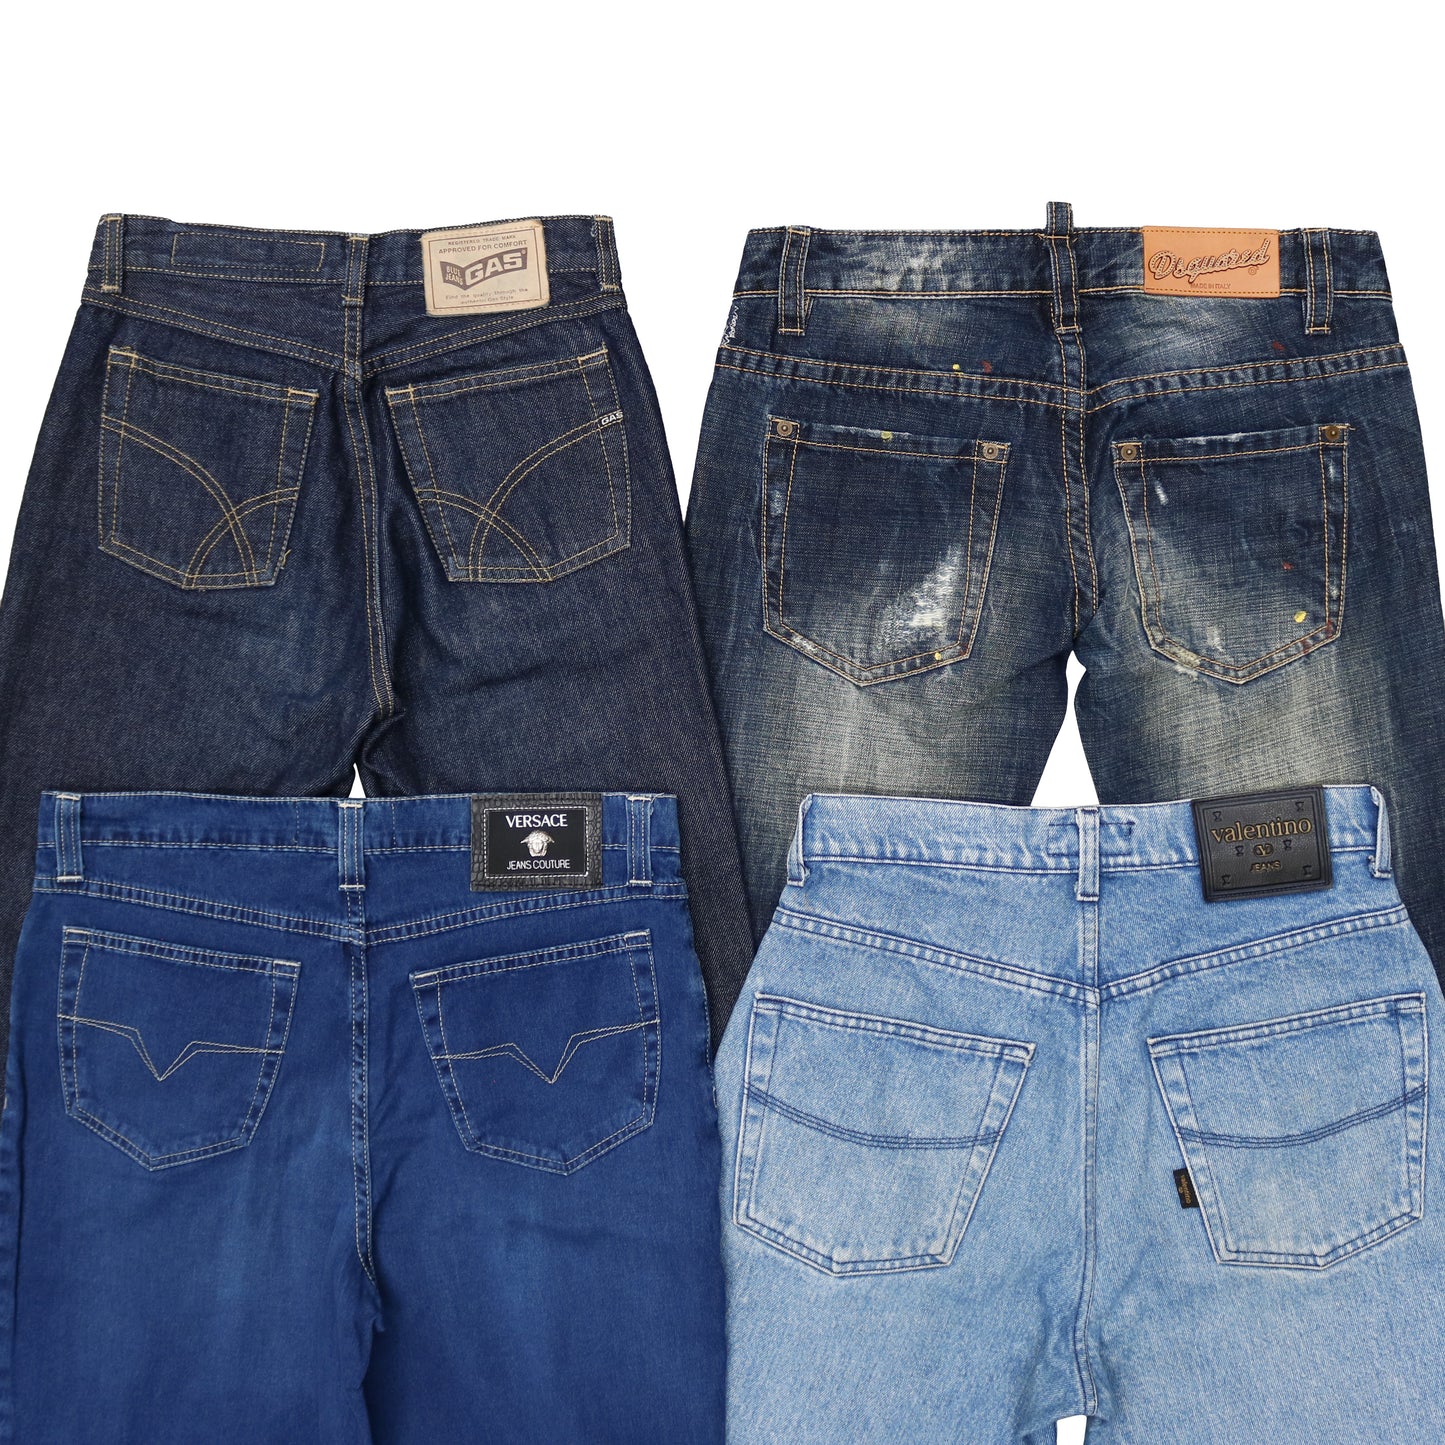 Best Selection of Assorted Jeans Branded